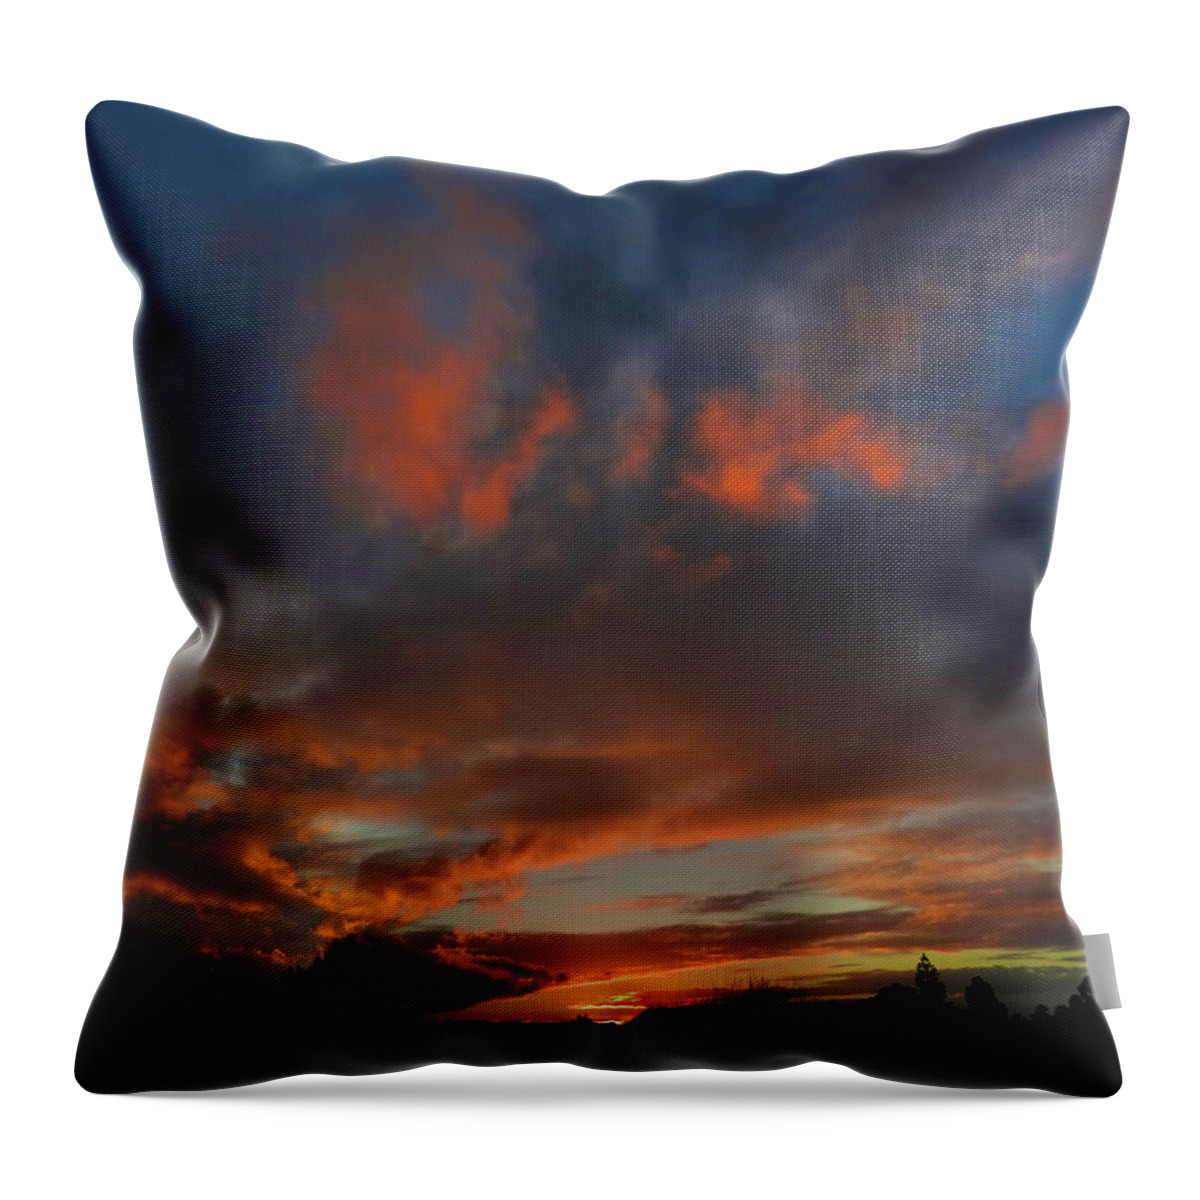 Sunset Throw Pillow featuring the photograph Contorted Sunset by Mark Blauhoefer